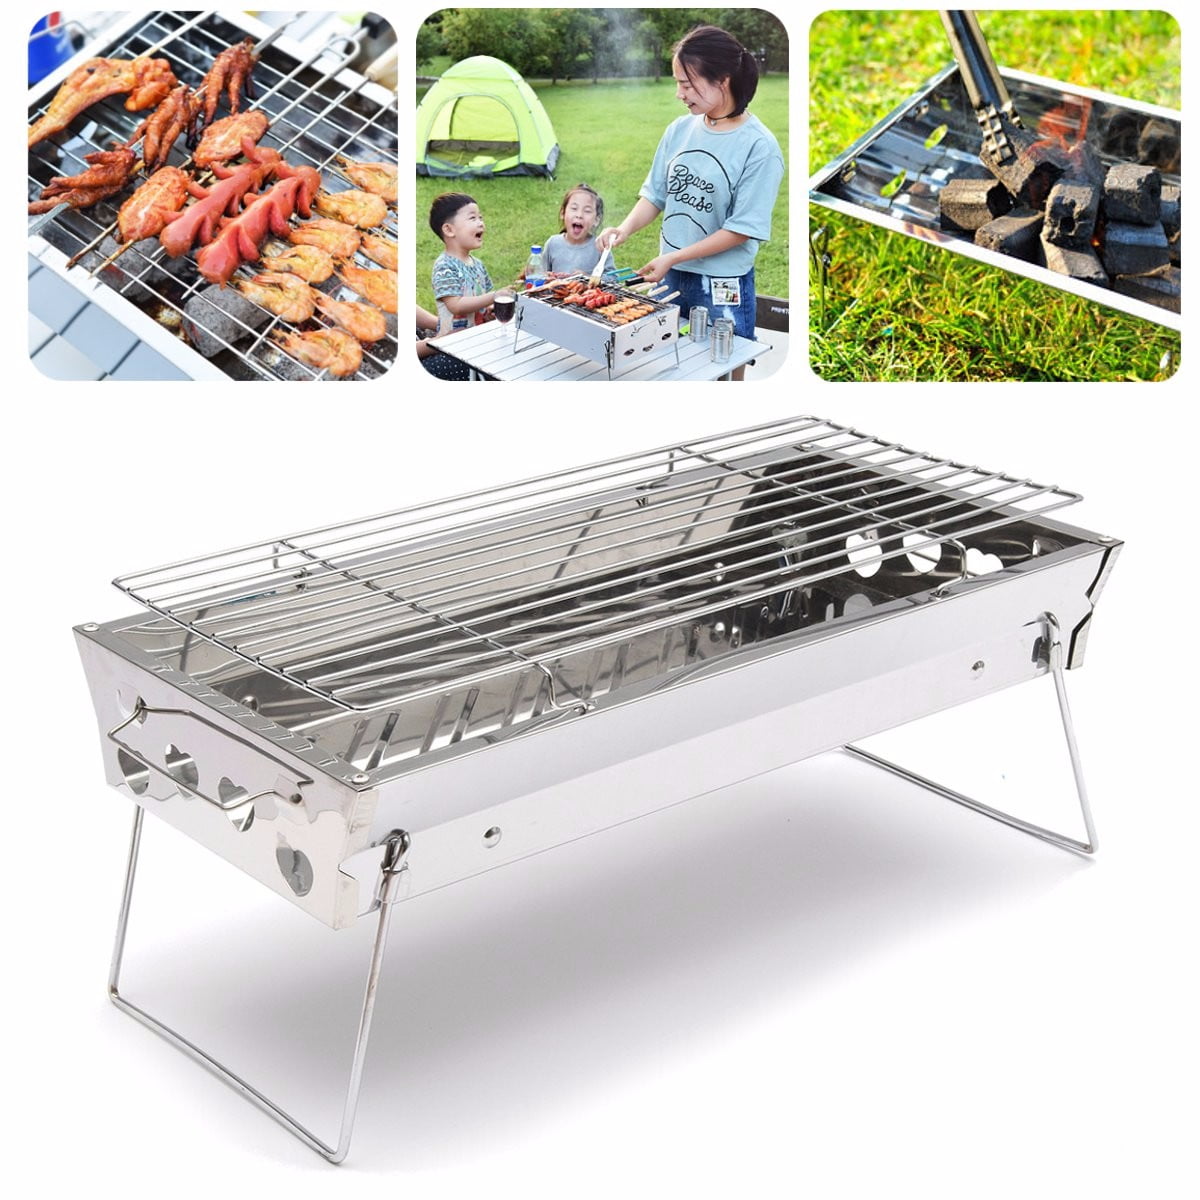 Fold Barbecue Charcoal Grill Stove Shish Kabob Stainless Steel BBQ Patio Camping 